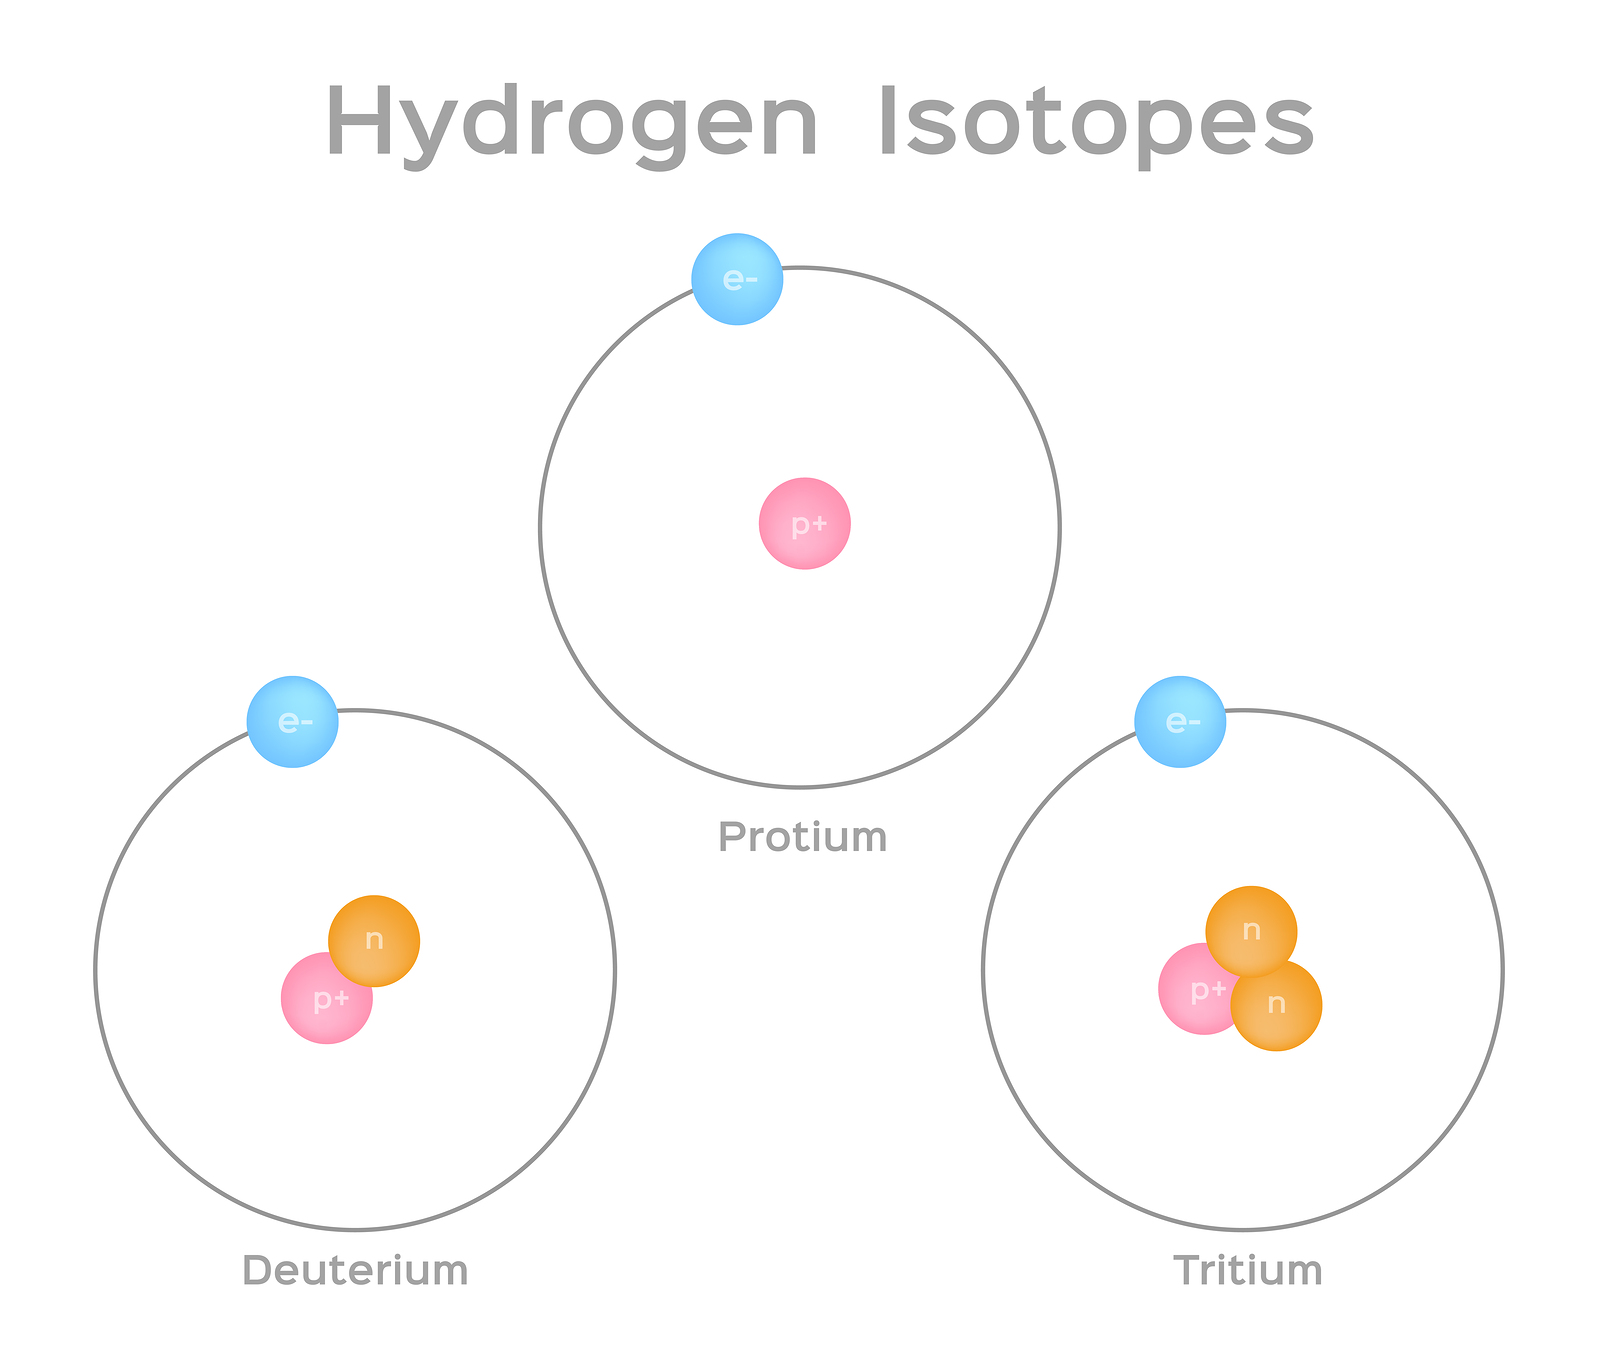 Isotopes are atoms